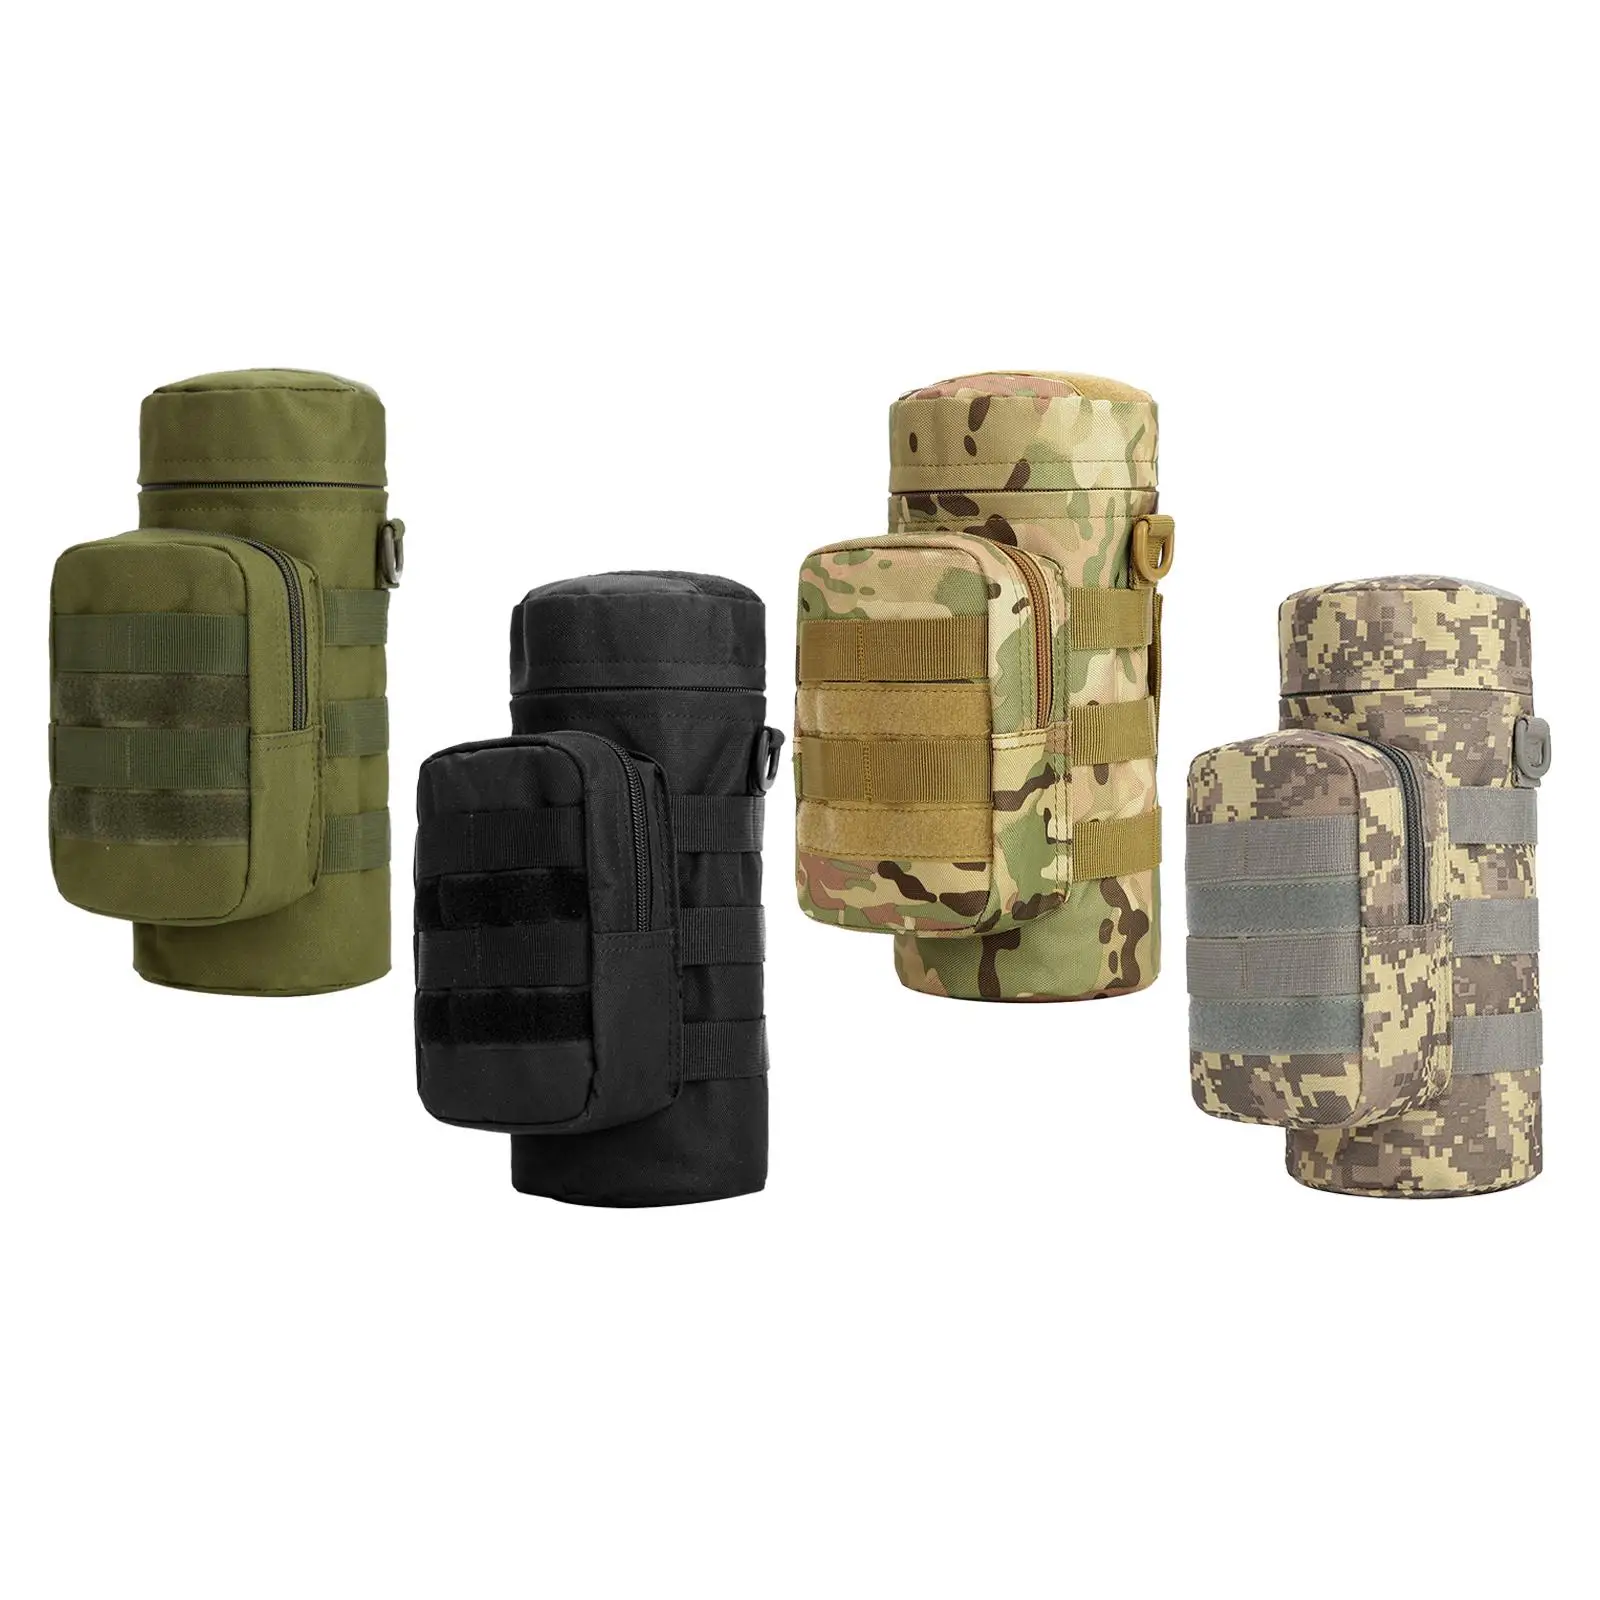 Outdoor Tactical Water Bottle Pouch Military Travel Tool Kettle Set Molle Water Bottle Holder w/ Shoulder Strap Camping Hiking